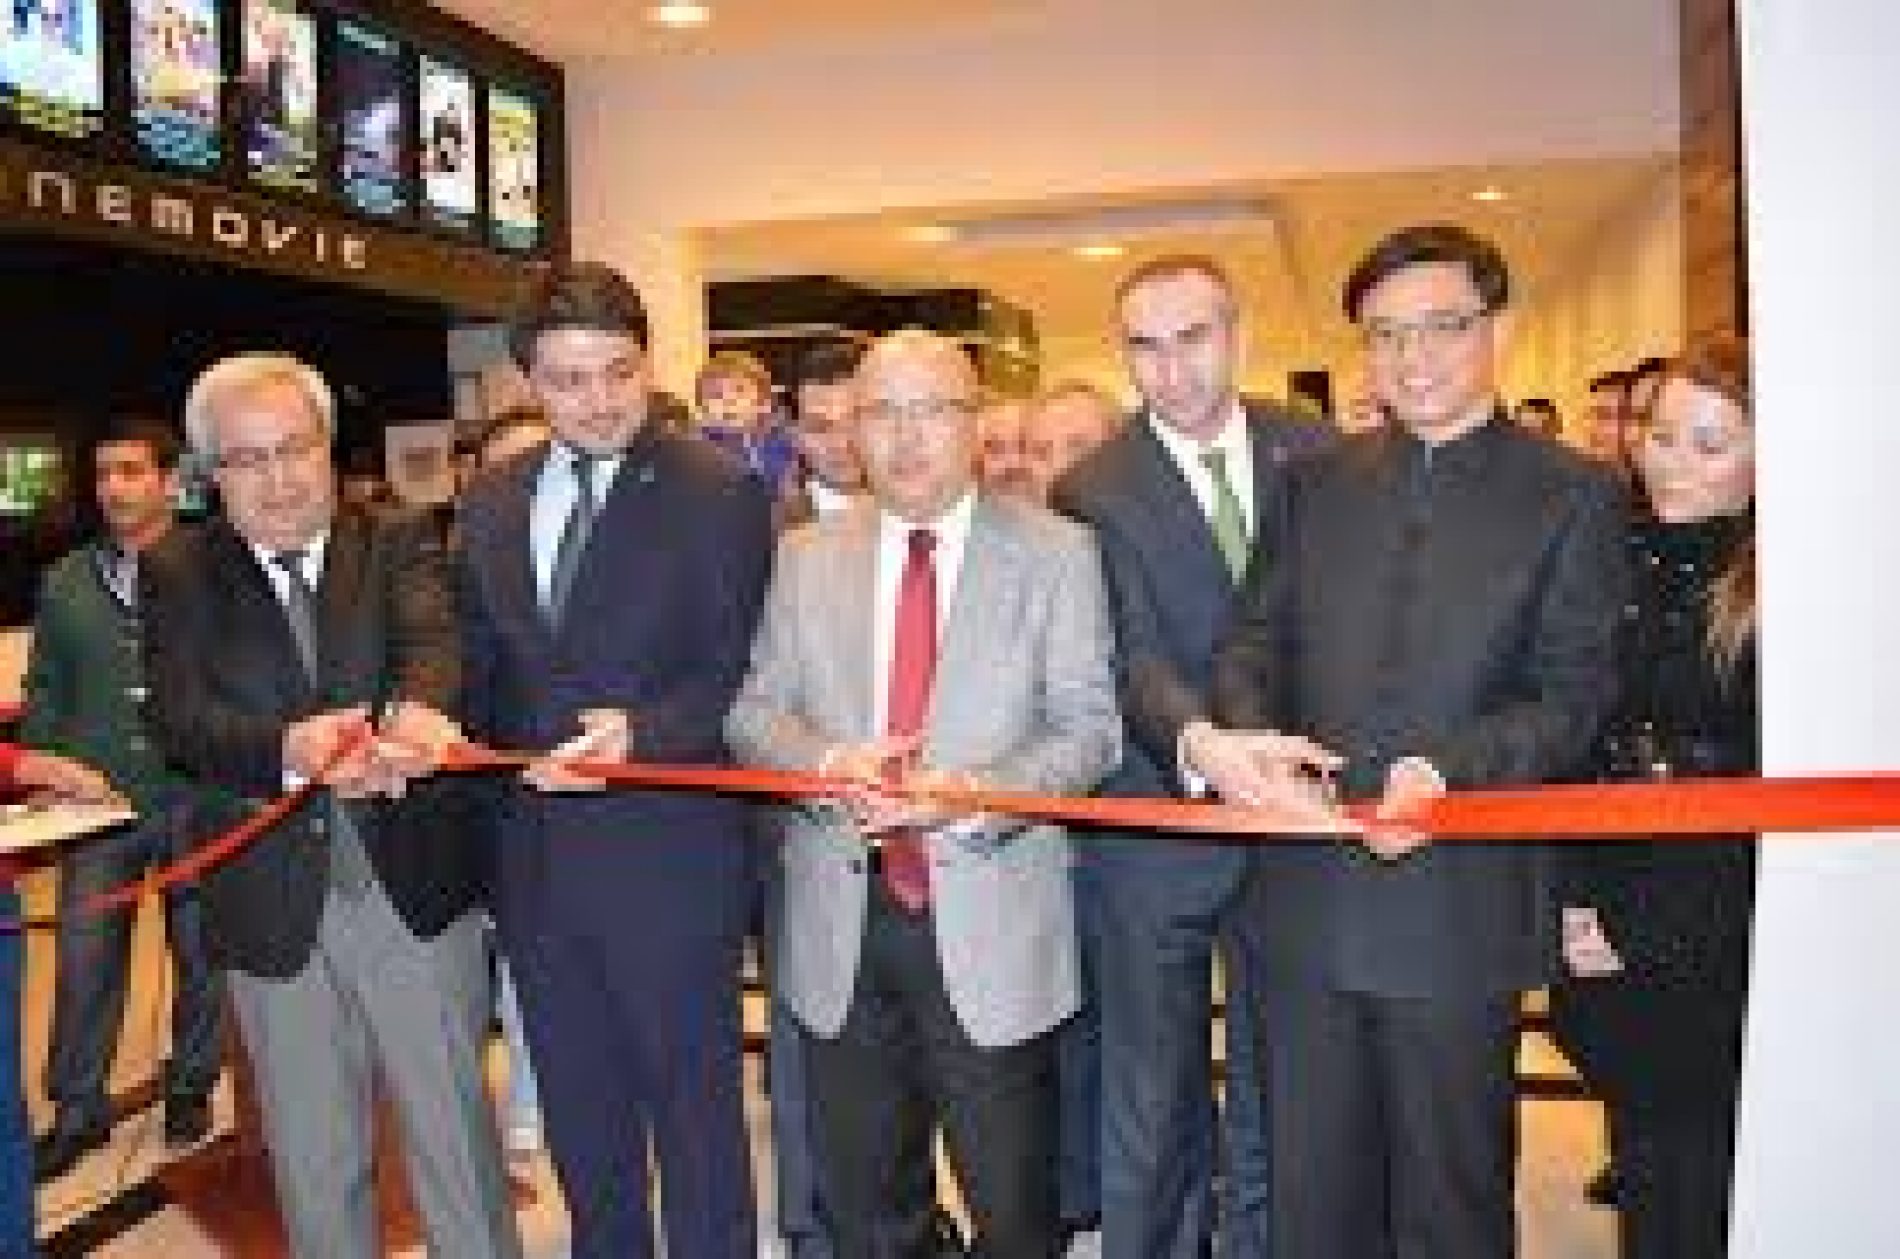 2014, CHINESE SILK EXHIBITION OPENED IN AFYON